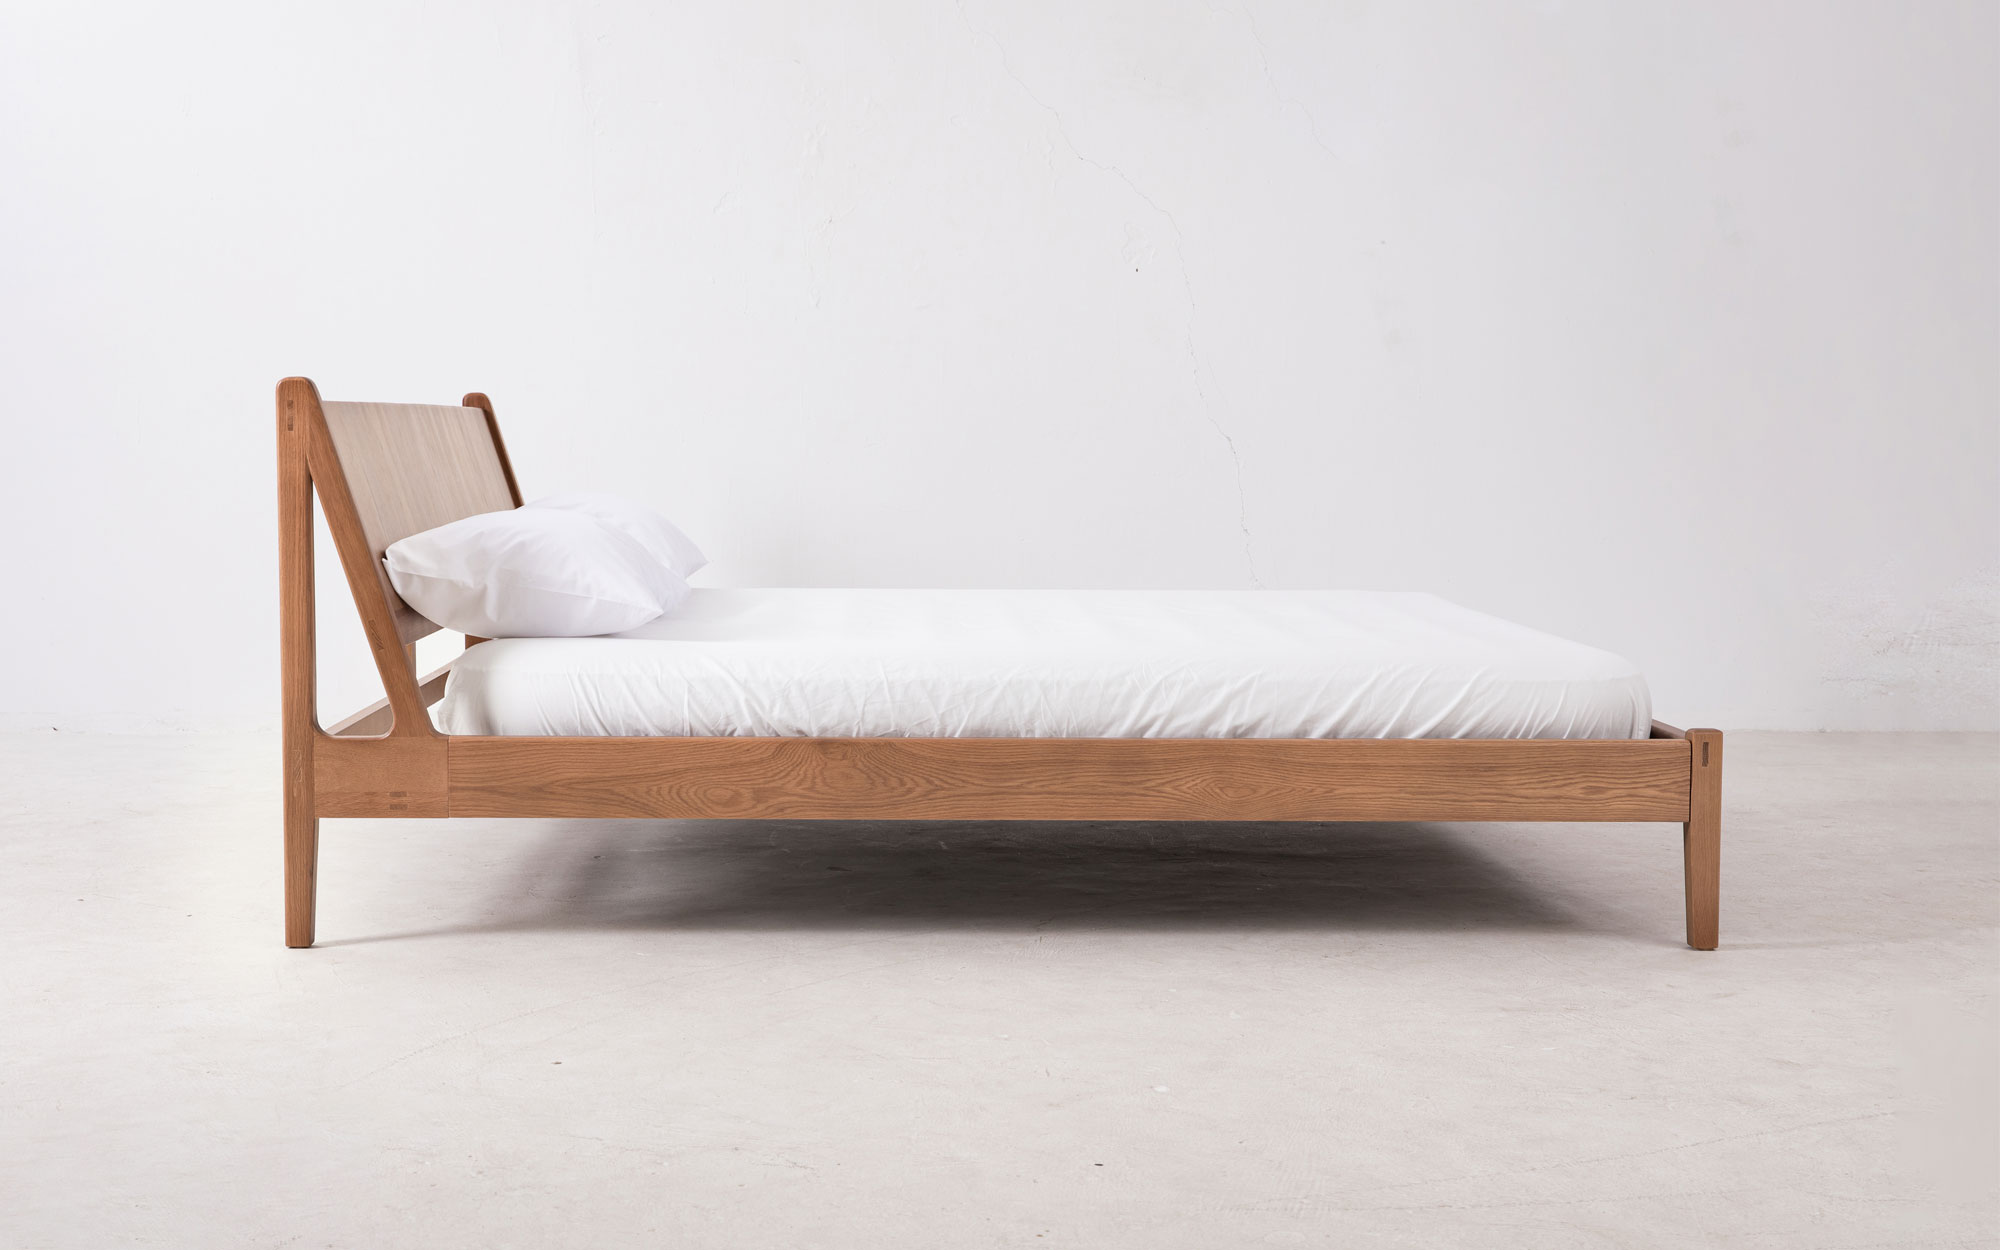 Minimalist Bed Frame Designs for Tranquil Bedrooms - Gessato